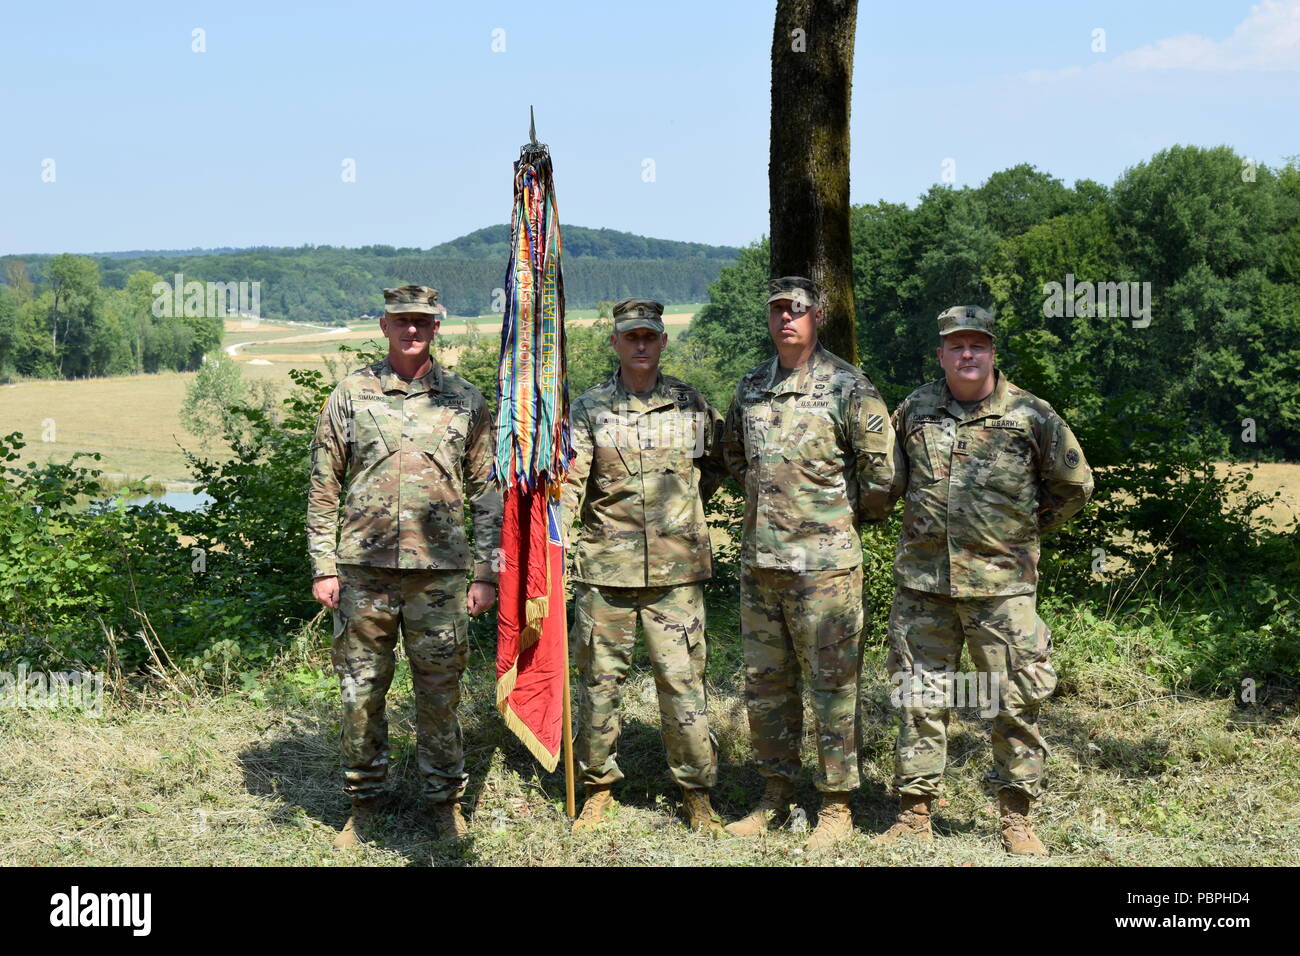 In 1918, the Macon Volunteers, then Company B of the 151st Machine Gun Battalion provided support by fire from this position during the capture of the Cote de Chatillon, a German stronghold in the Kriemhilde Stallung Line in the Meuse Argonne campaign. On July 25, 2018, The colors of the Georgia Army National Guard’s 48th Infantry Brigade Combat Team, the lineal descendant of the Macon Volunteers returned to this spot one hundred years later during the Centennial commemoration of World War I. Planting the colors are Brig. Gen. Randall Simmons, commander of the Georgia Army National Guard and p Stock Photo